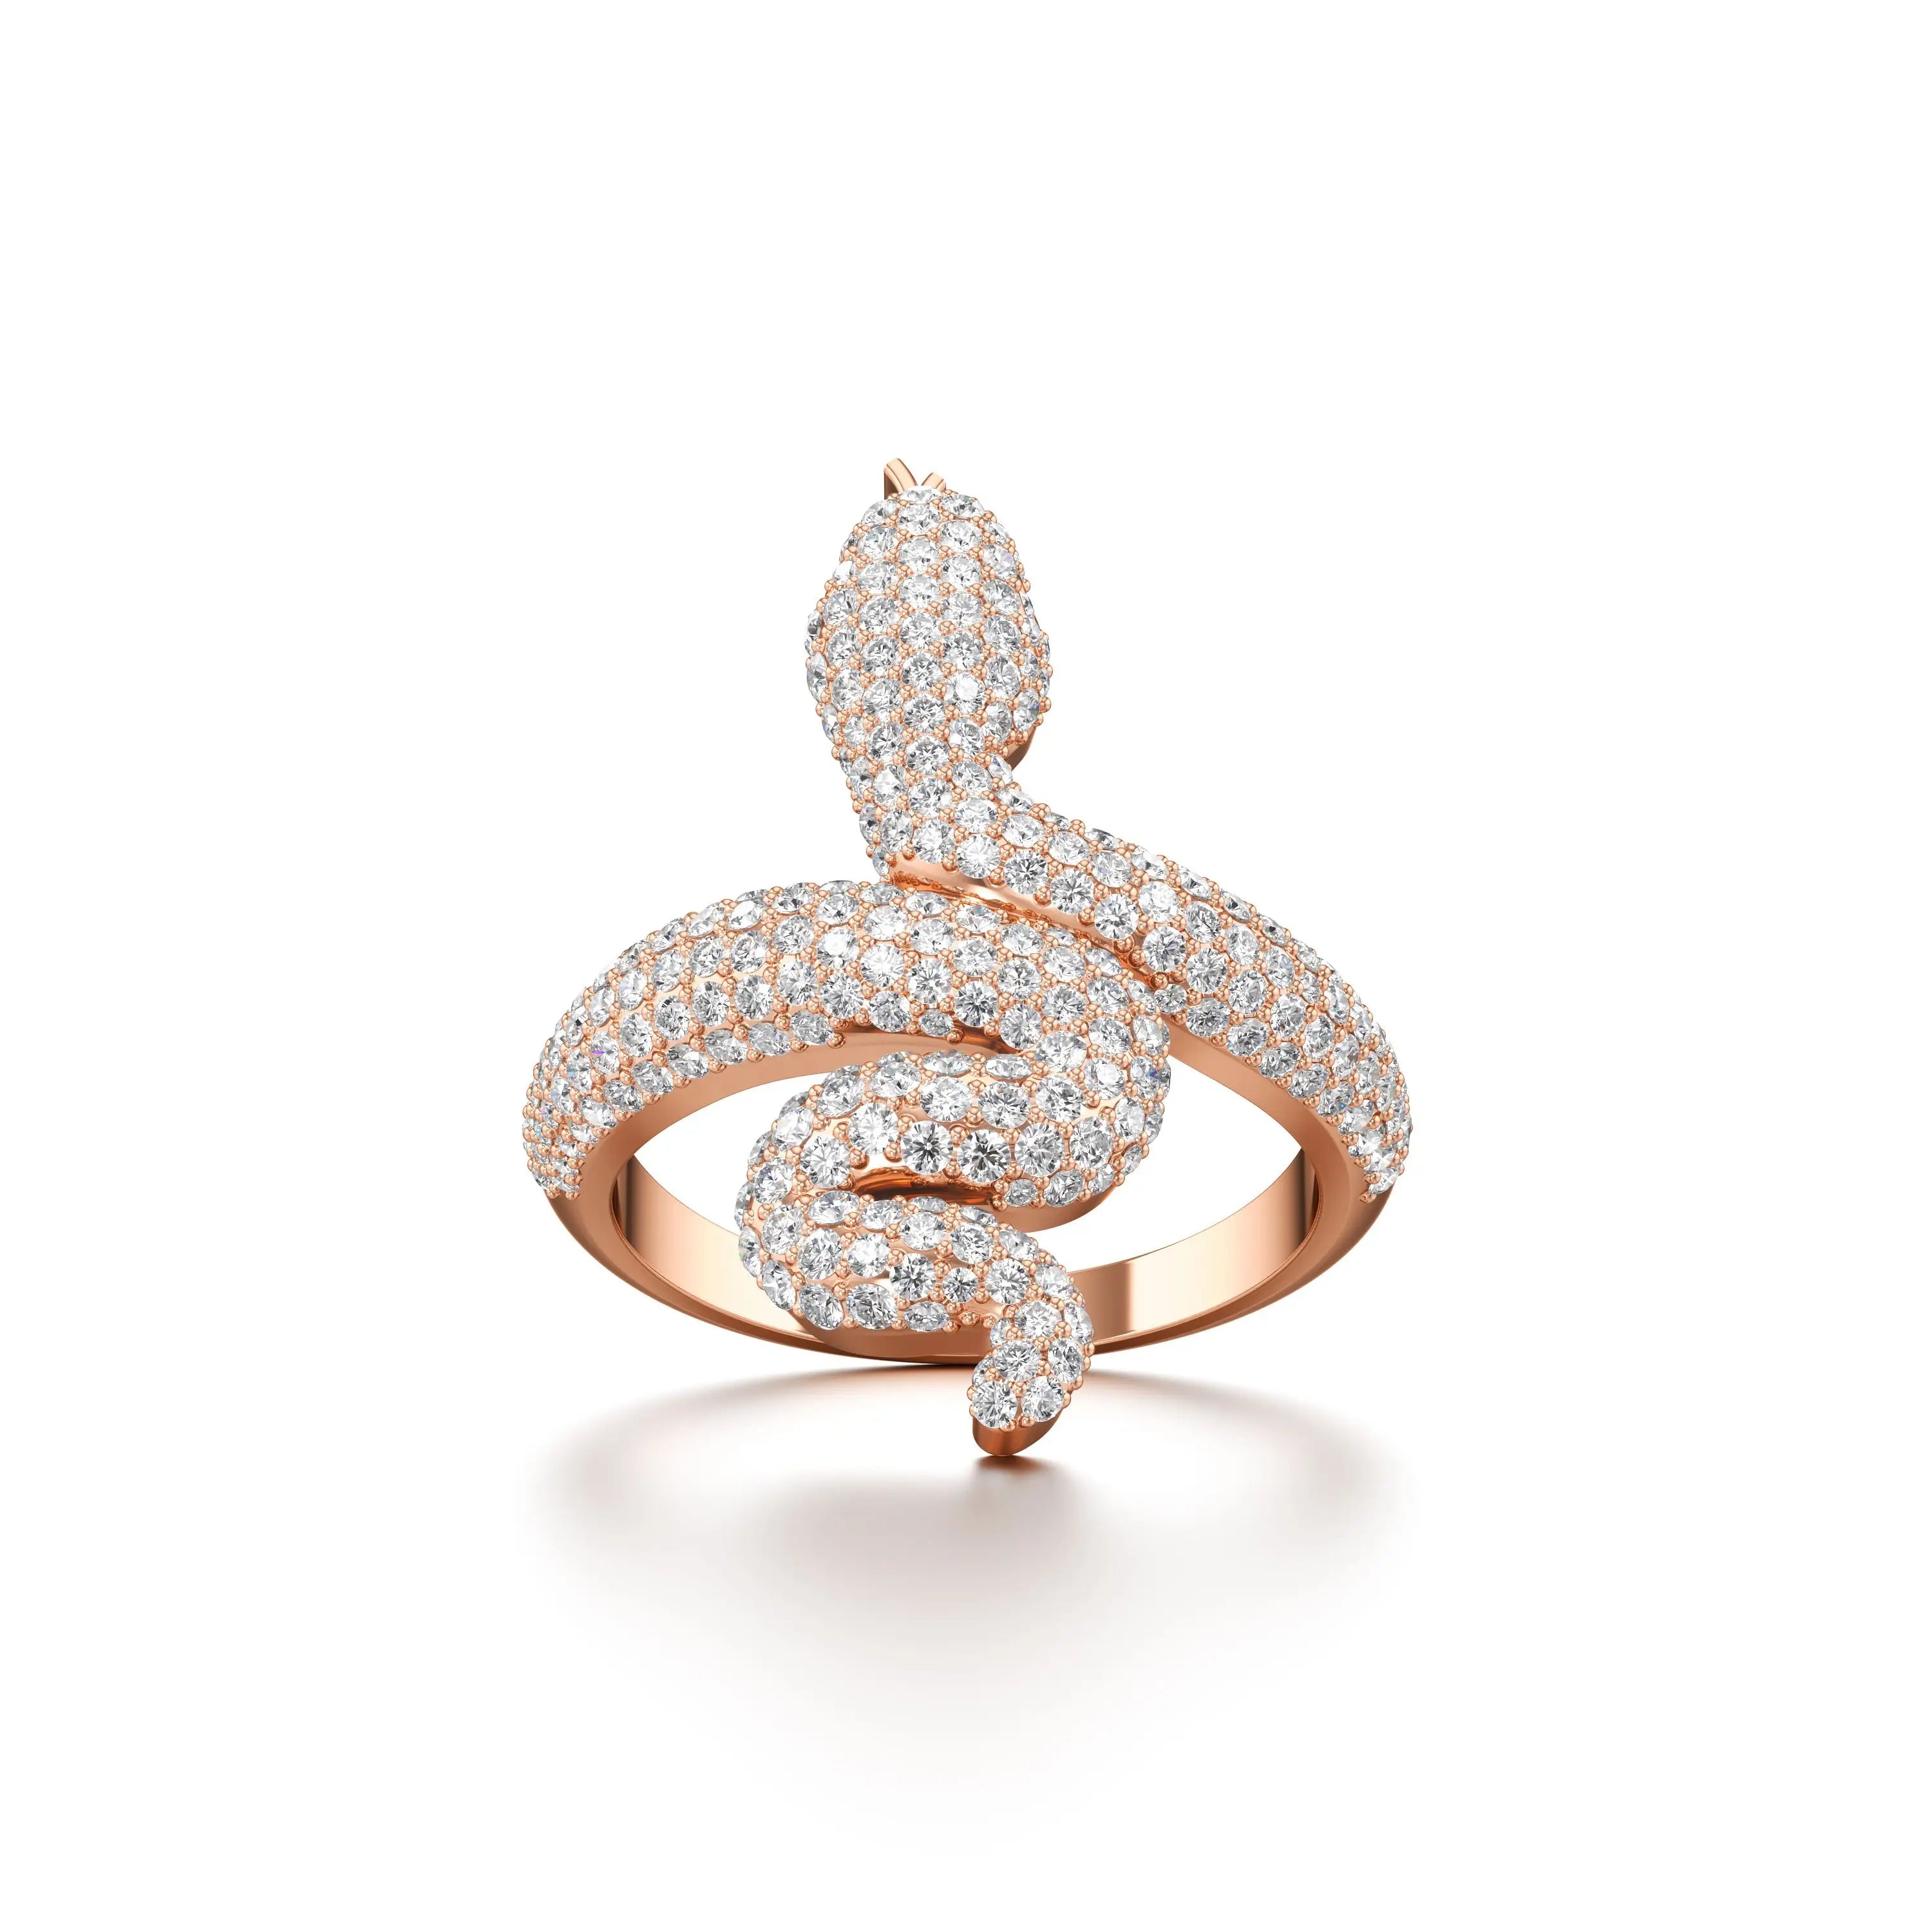 Icy Coiled Snake Lab Grown Diamond Ring